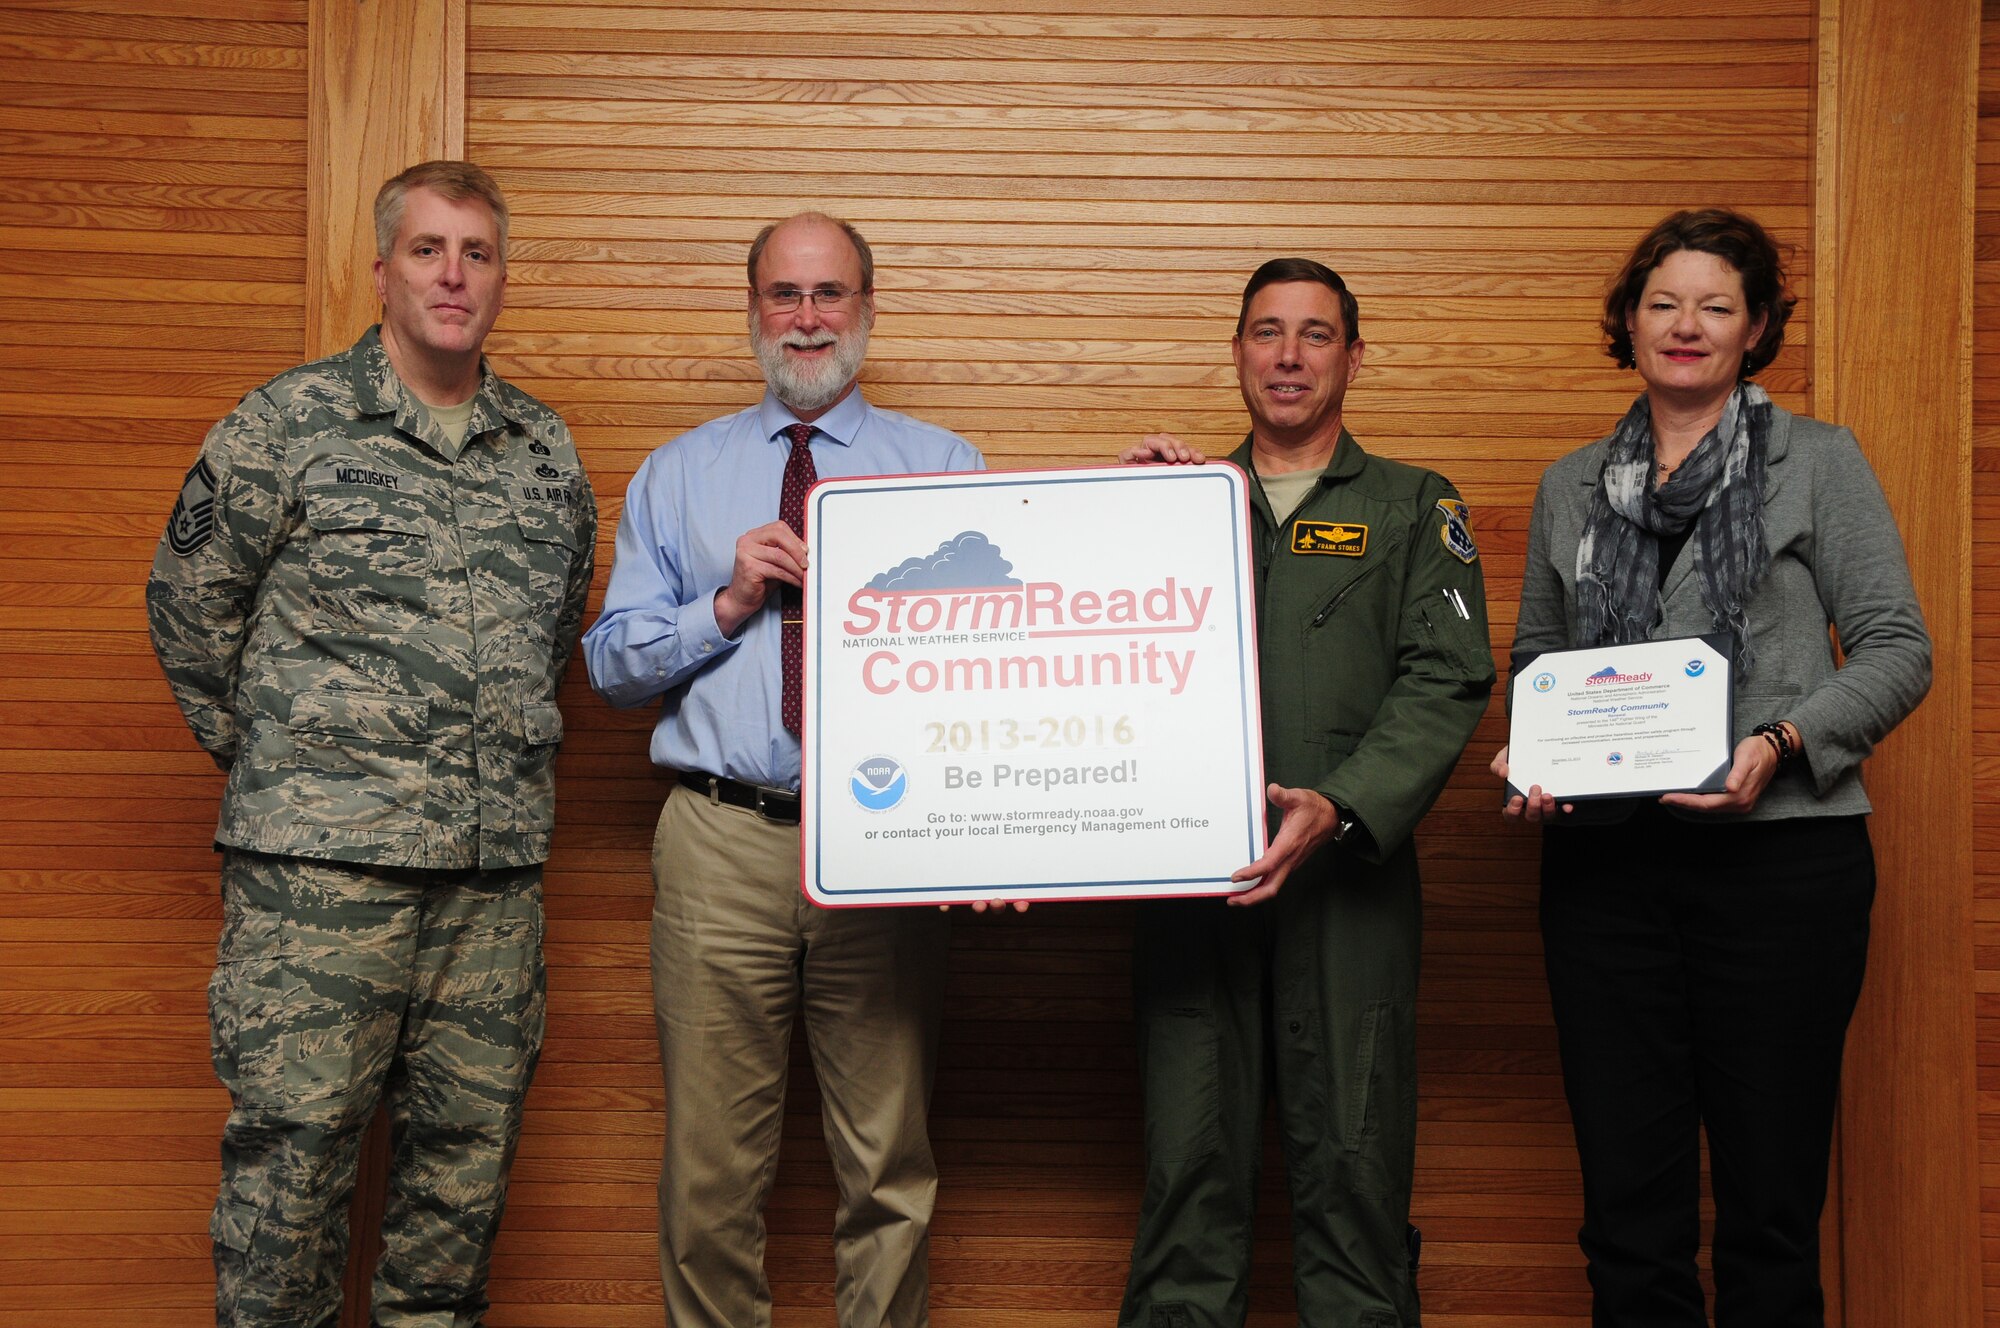 Carol Christenson and Michael Stewart from the National Weather Service present Col. Frank H. Stokes, 148th Fighter Wing Commander and Senior Master Sgt. Kelvin R. McCuskey, Installation Emergency Manager with a StormReady sign and certificate at the 148th Fighter Wing, Duluth, Minn., Nov. 13, 2013.  The sign and certificate recognized the Wing for being a StormReady community for another three years.  (U.S. Air National Guard photo by Master Sgt. Ralph J. Kapustka/Released)